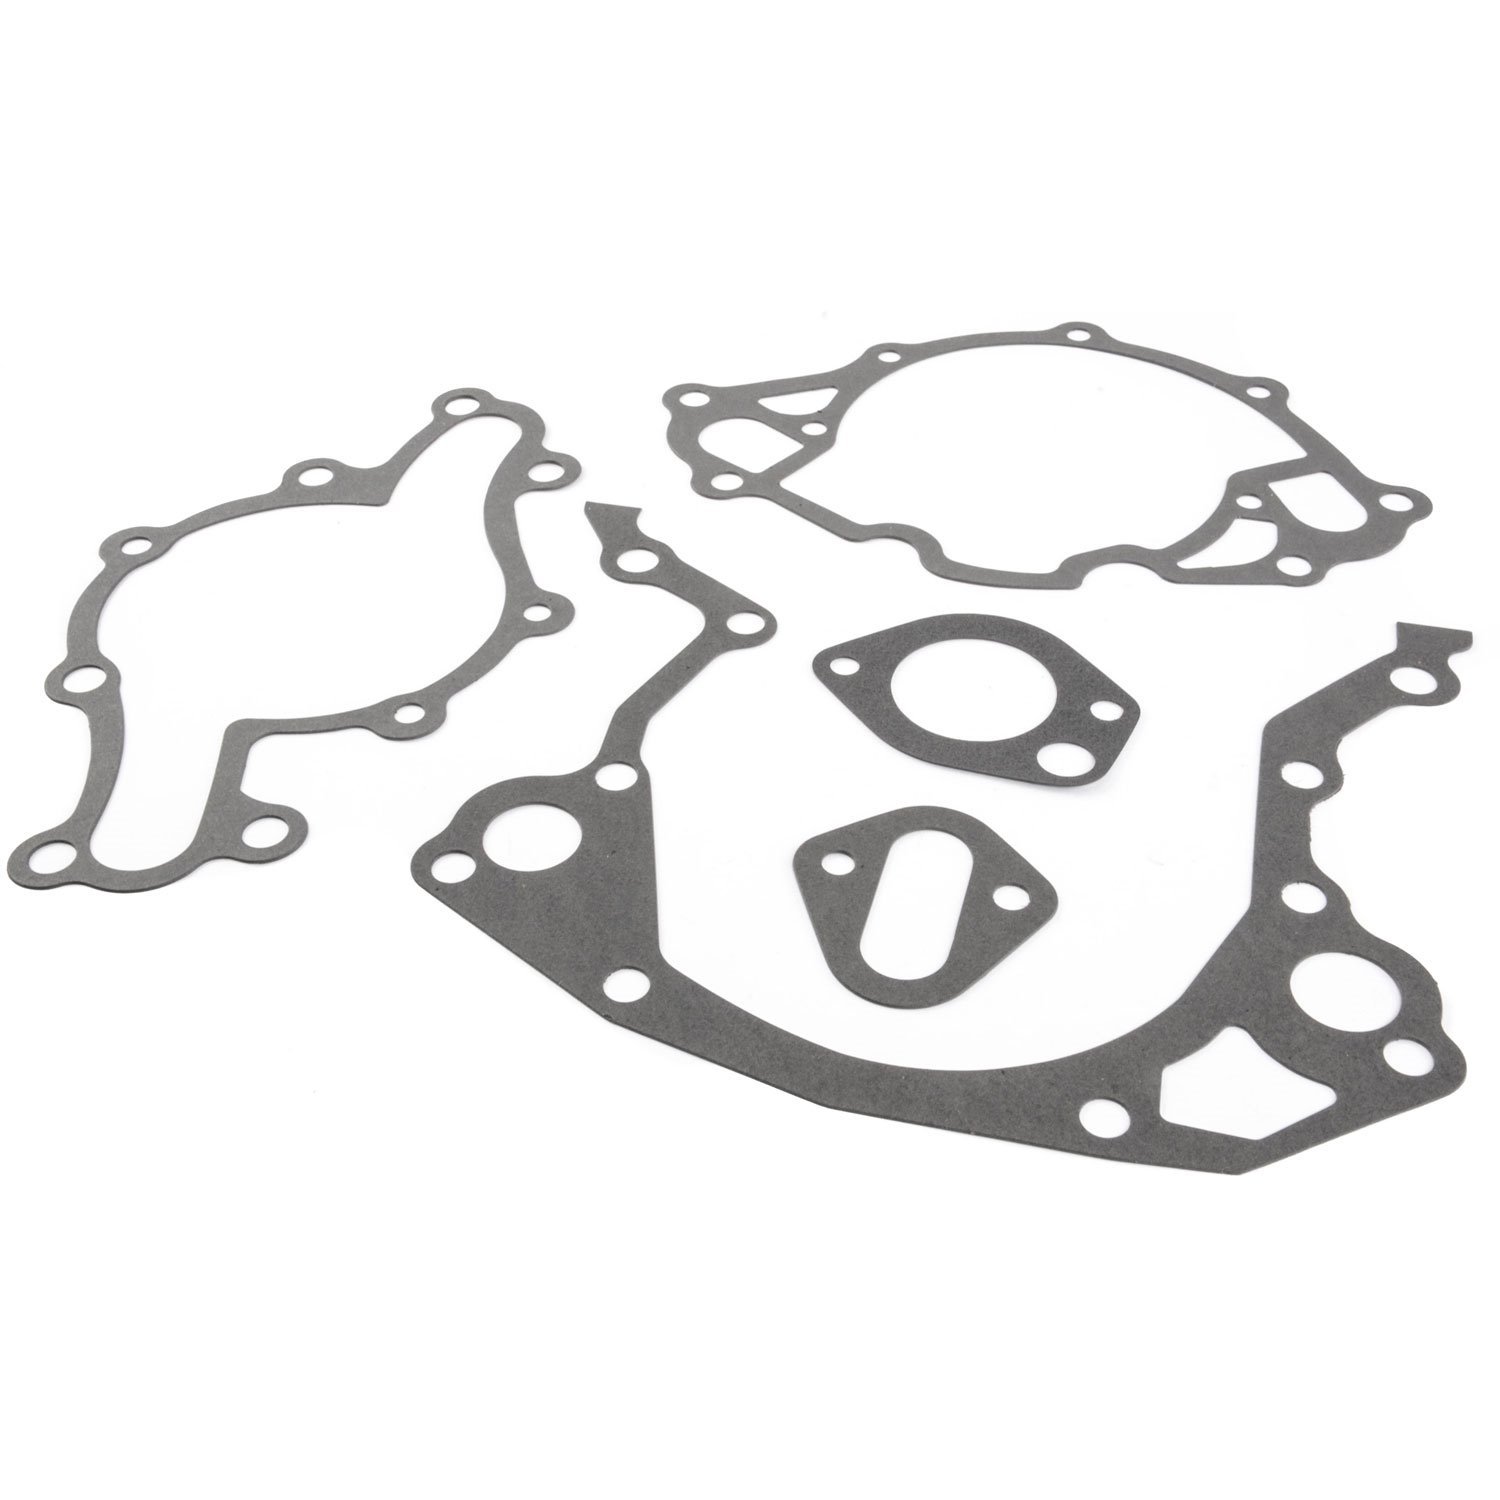 Timing Cover Gasket Set for 1962-1991 Small Block Ford 289/302/351W